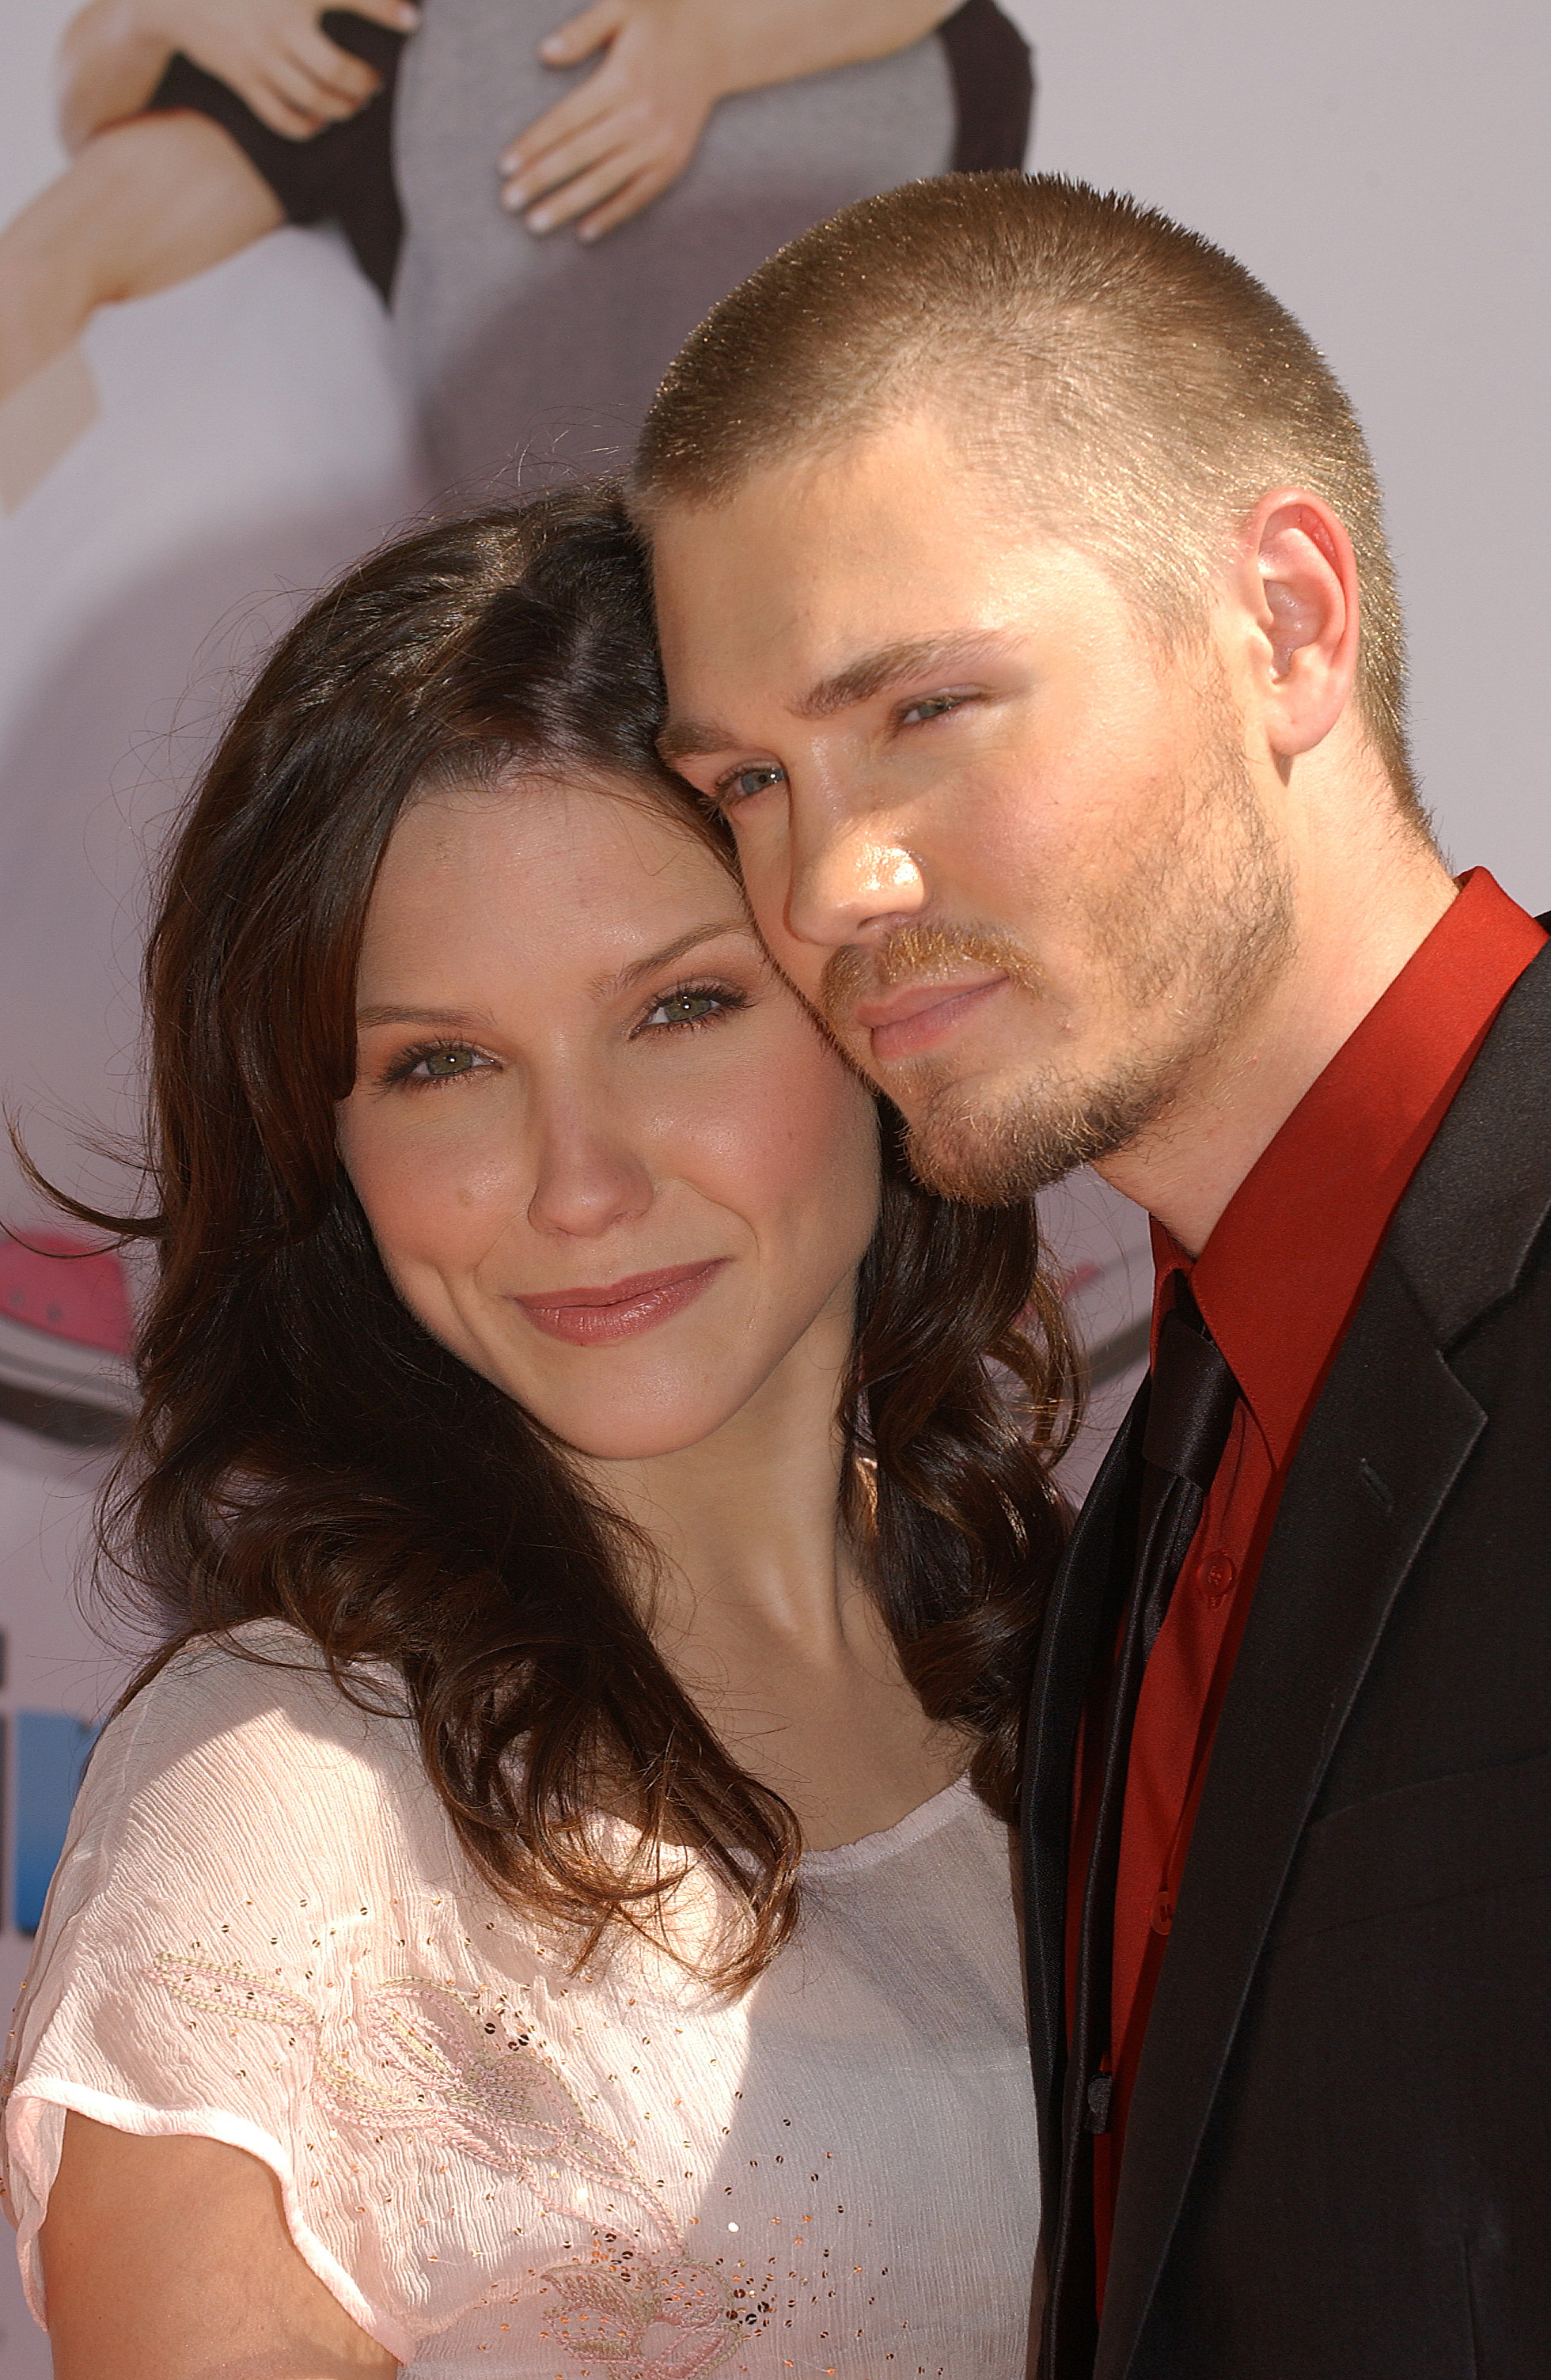 Sophia Bush and Chad Michael Murray hugging on the red carpet